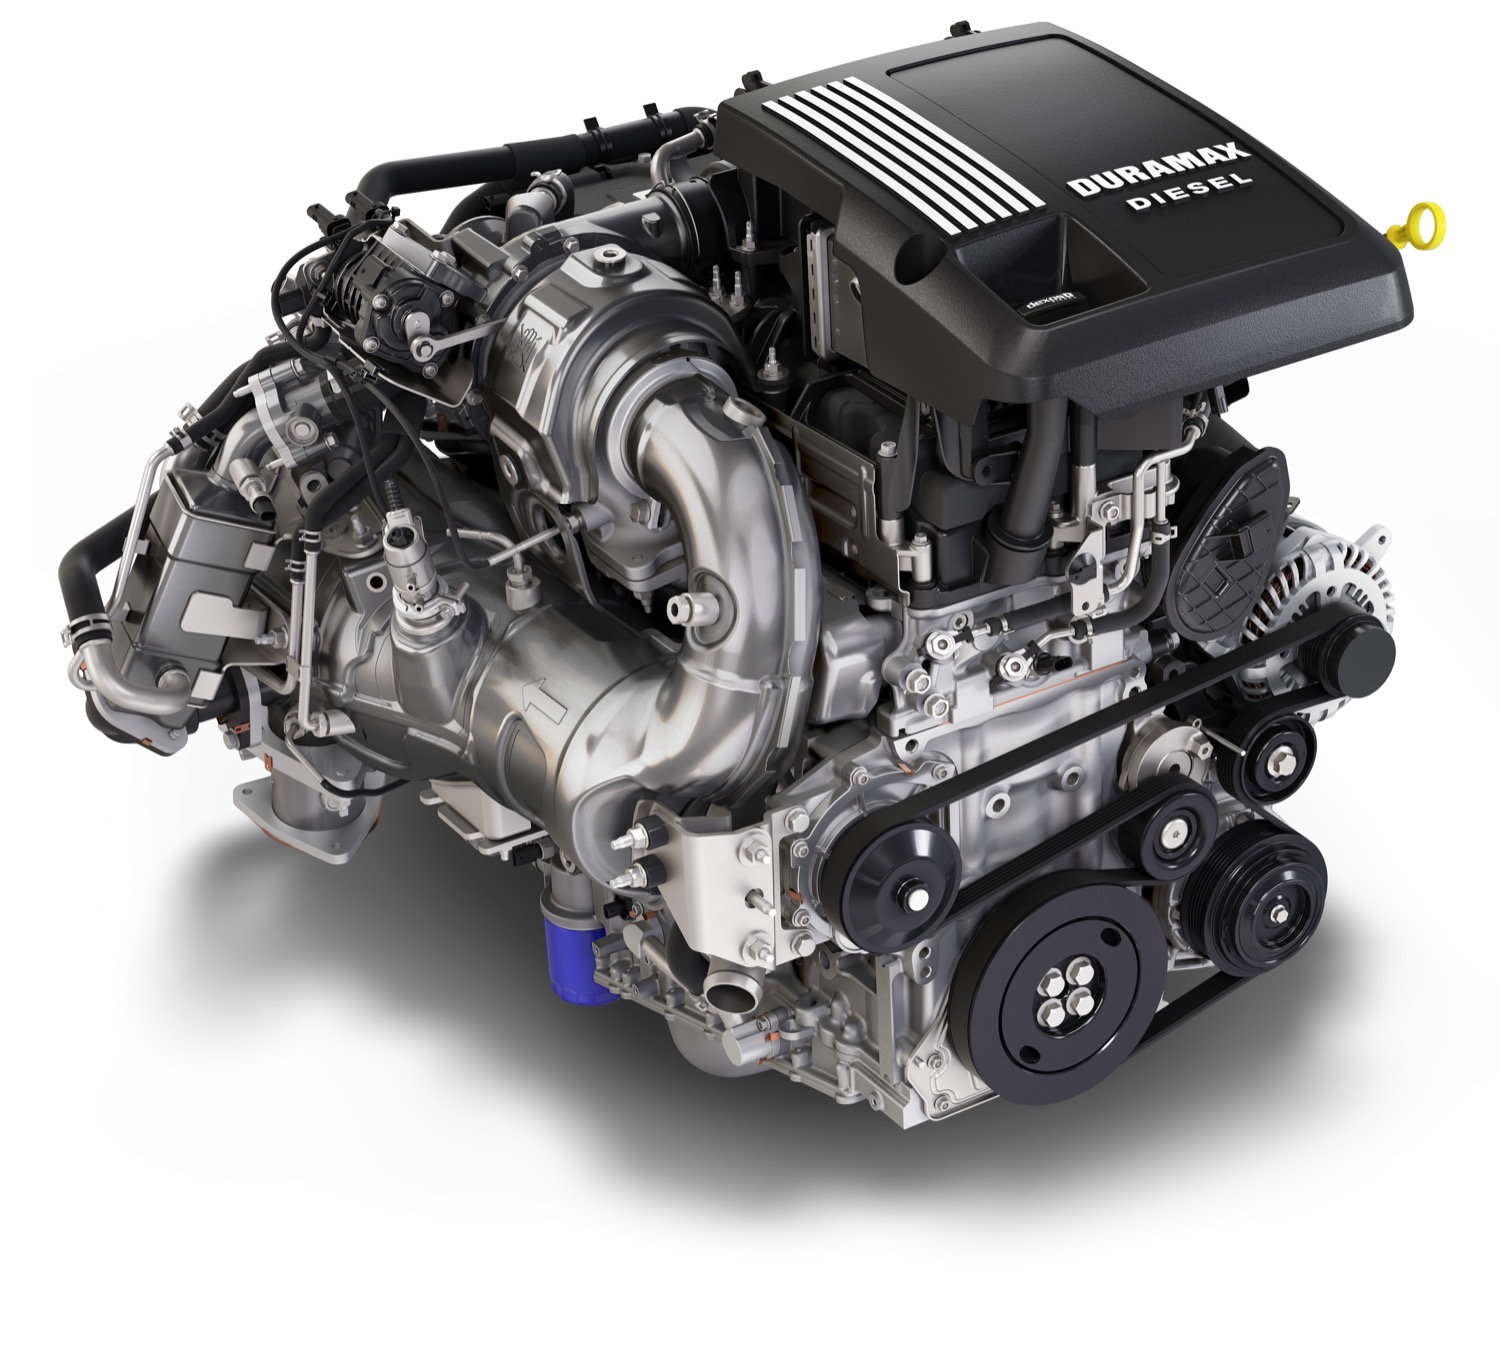 What Diesel Engine Does Chevy Use?